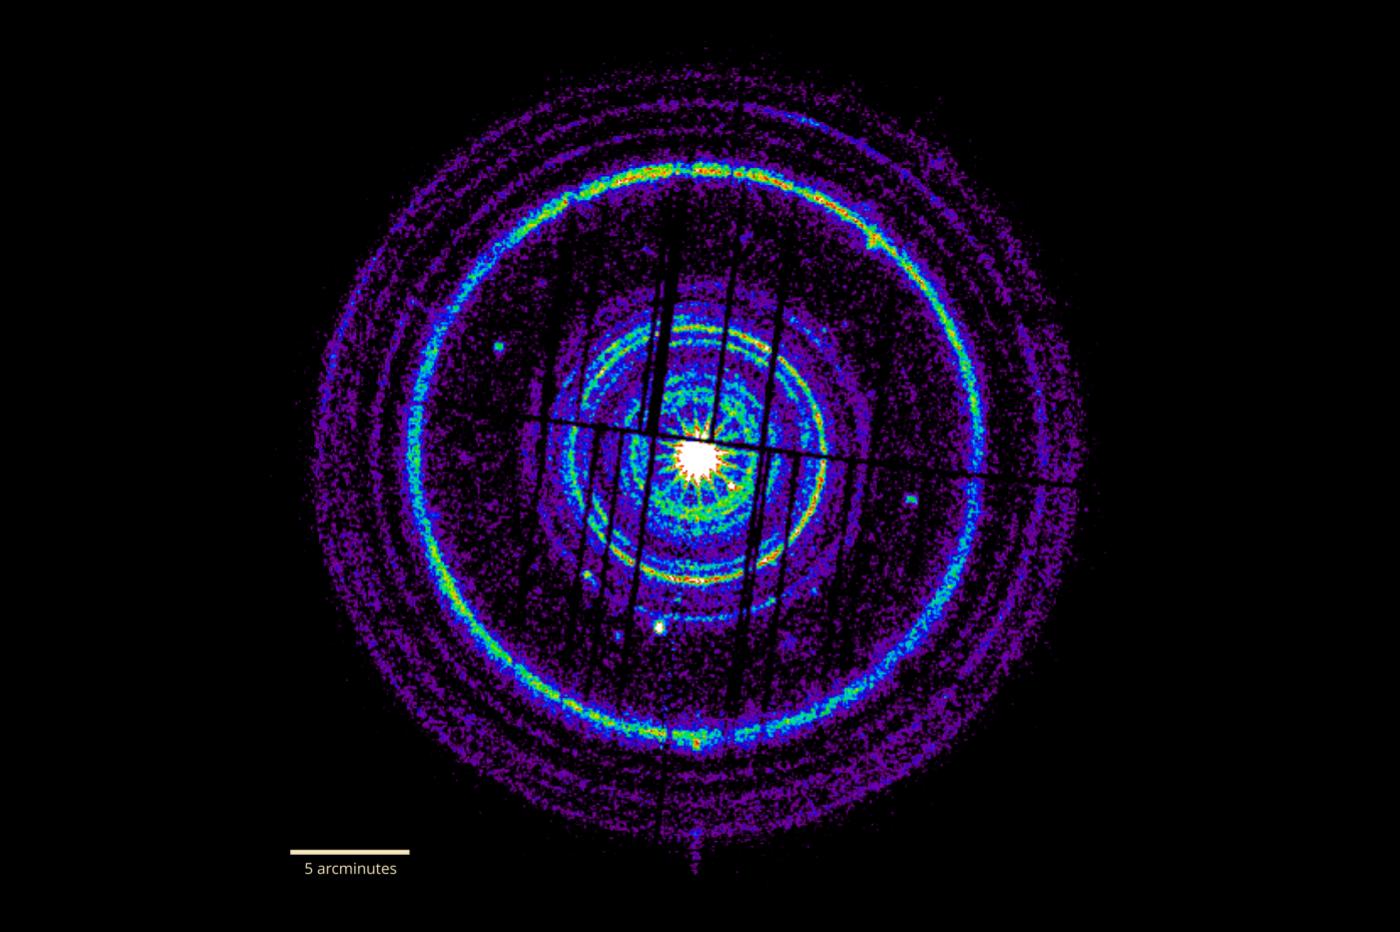 X-ray rings that can appear after a gamma ray burst